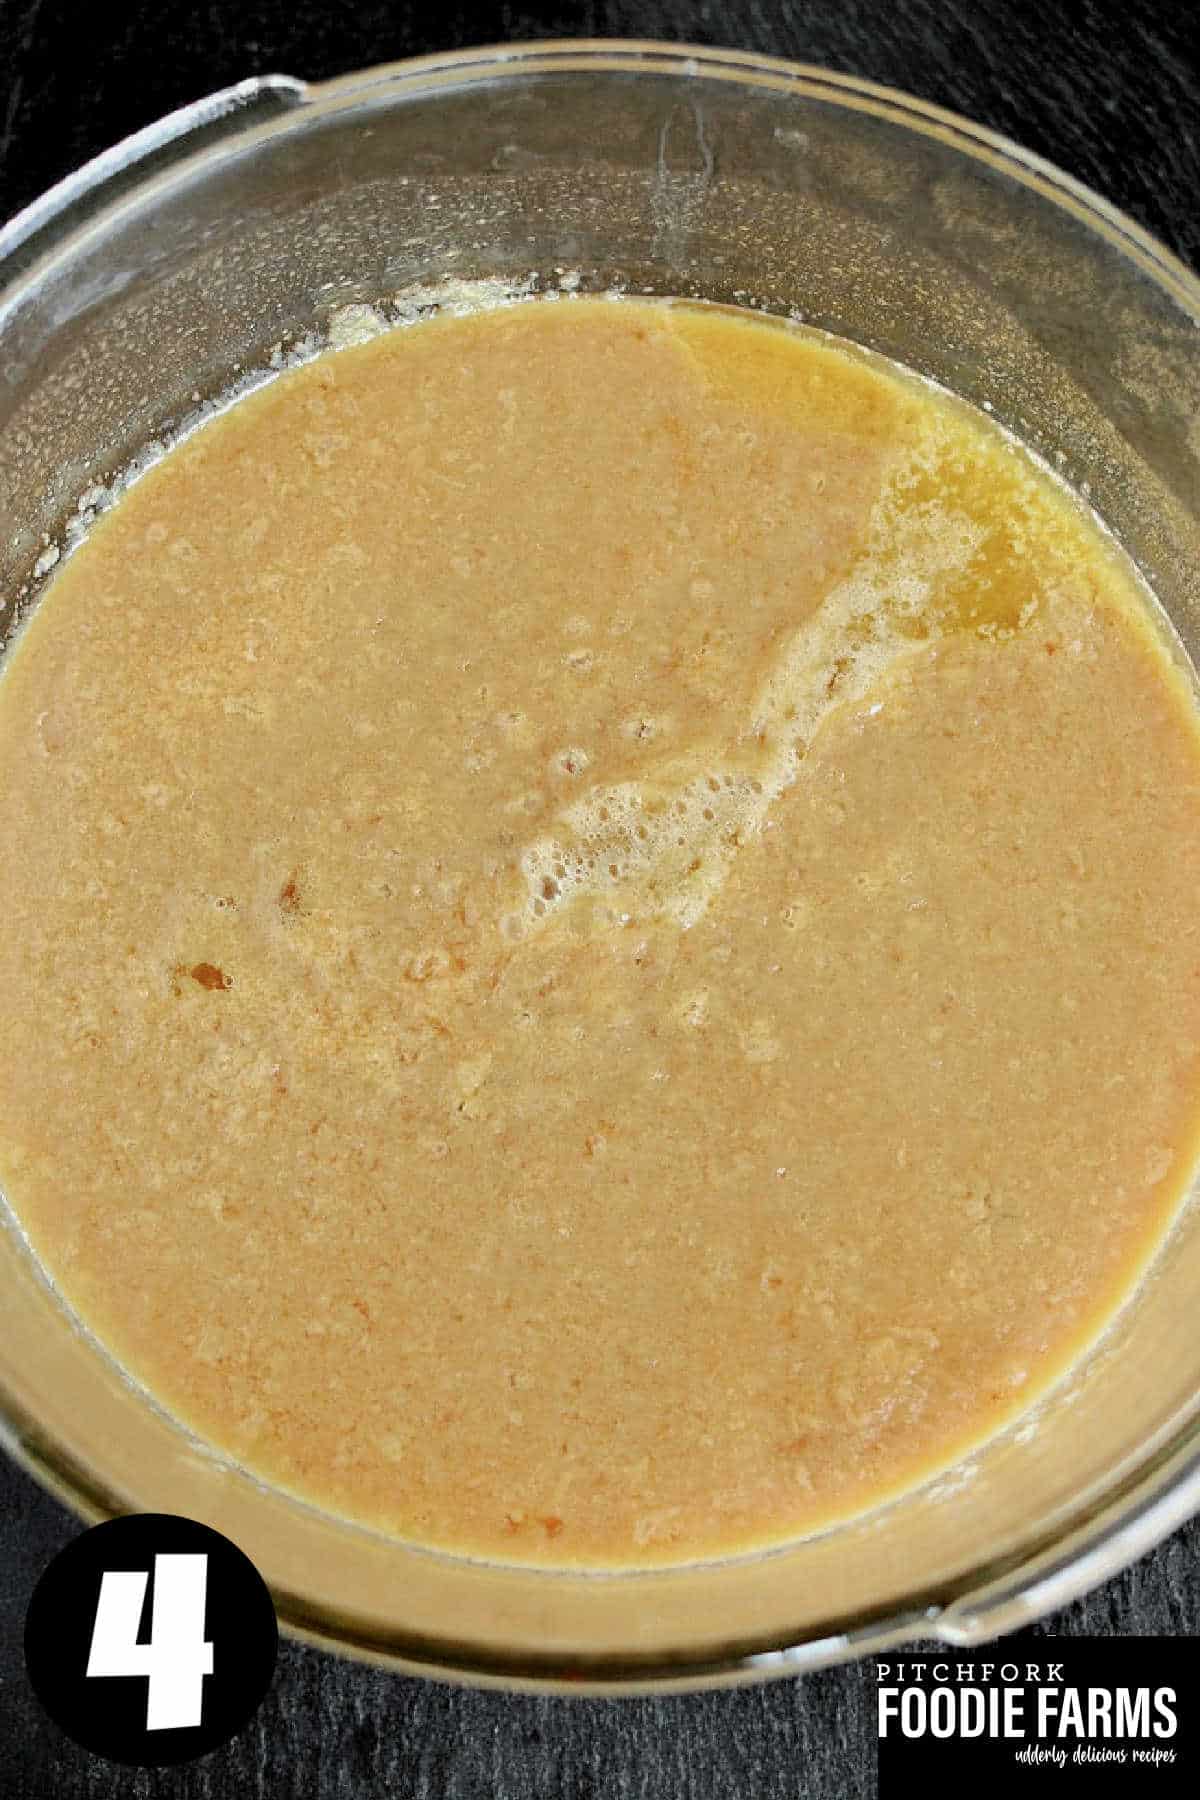 A bowl of caramel that was cooked in the microwave.